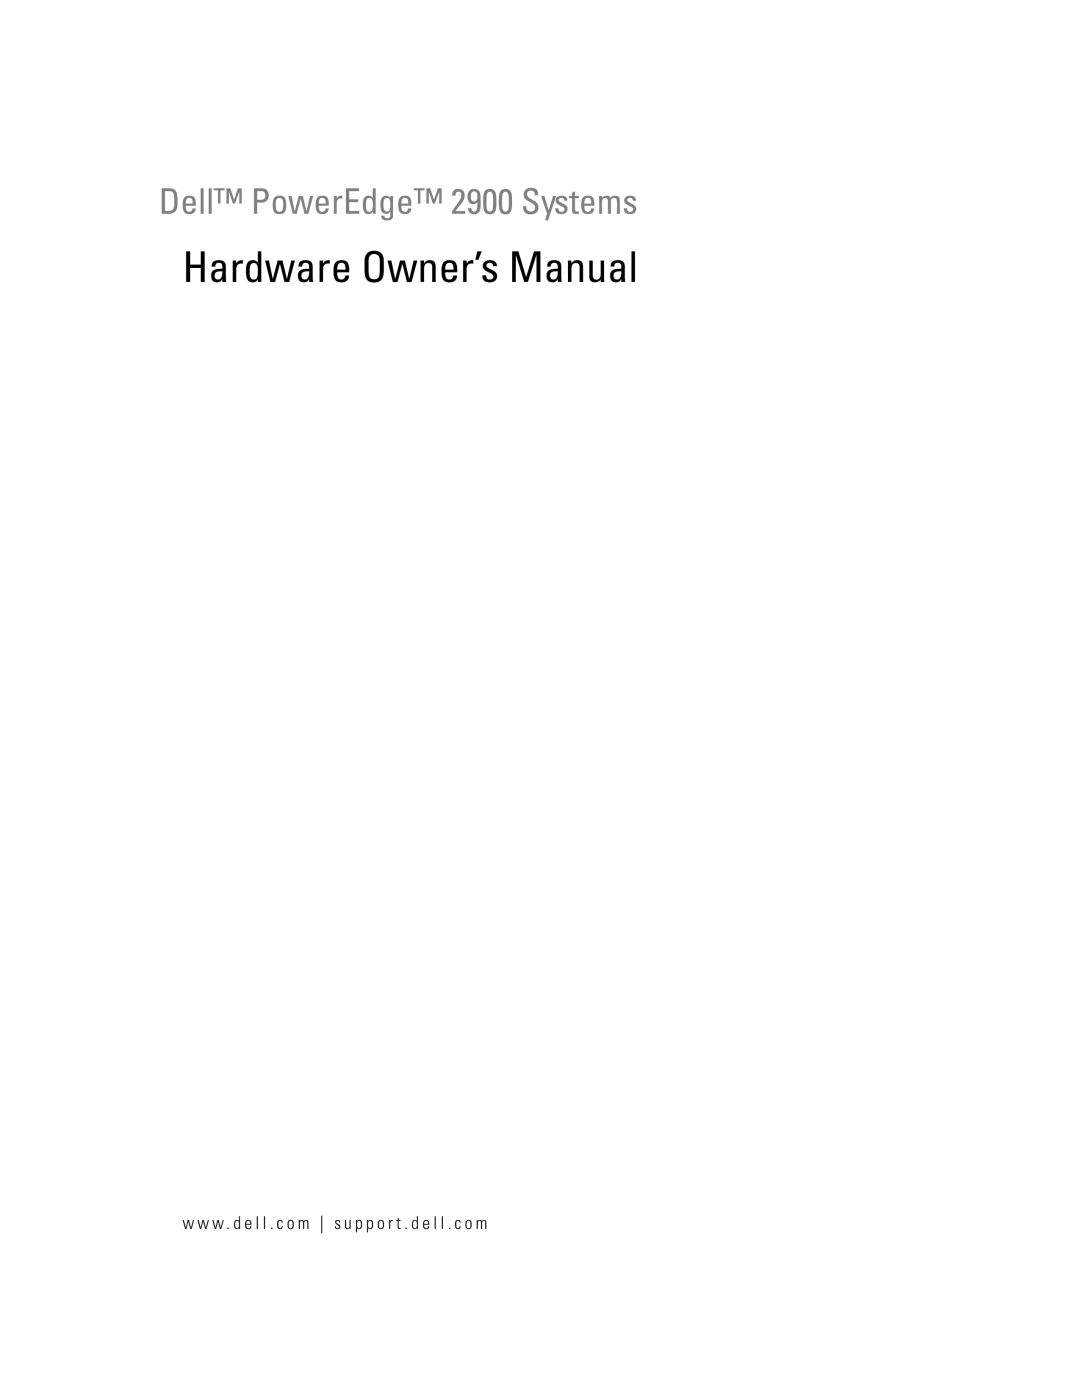 Dell owner manual Hardware Owner’s Manual, Dell PowerEdge 2900 Systems 